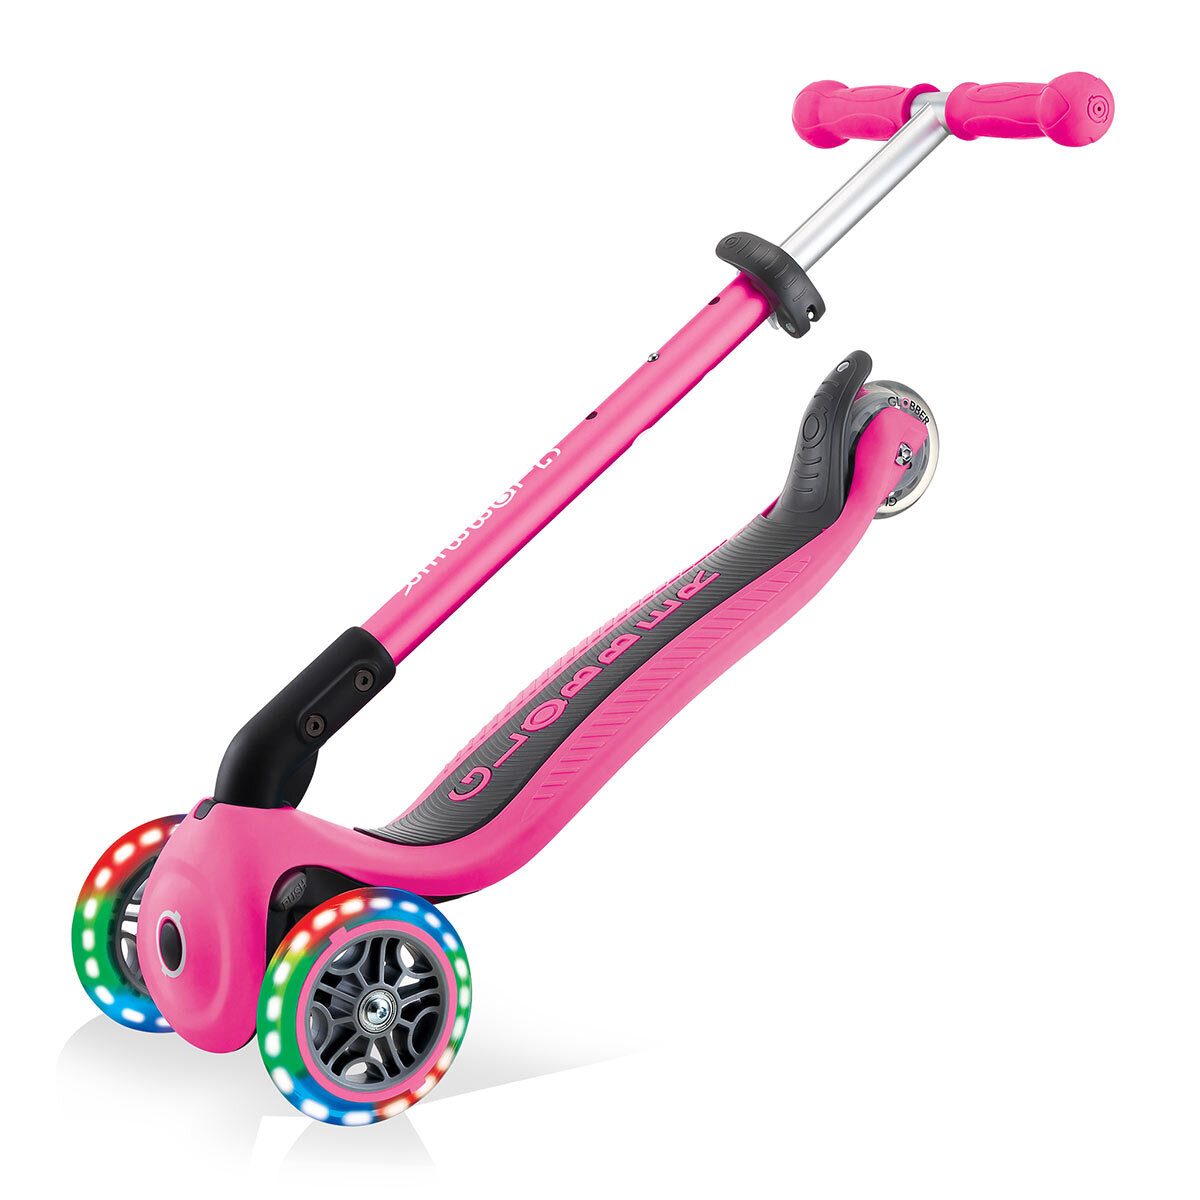 Buy Globber Primo Lights Scooter in Pink 4 Image at Costco.co.uk